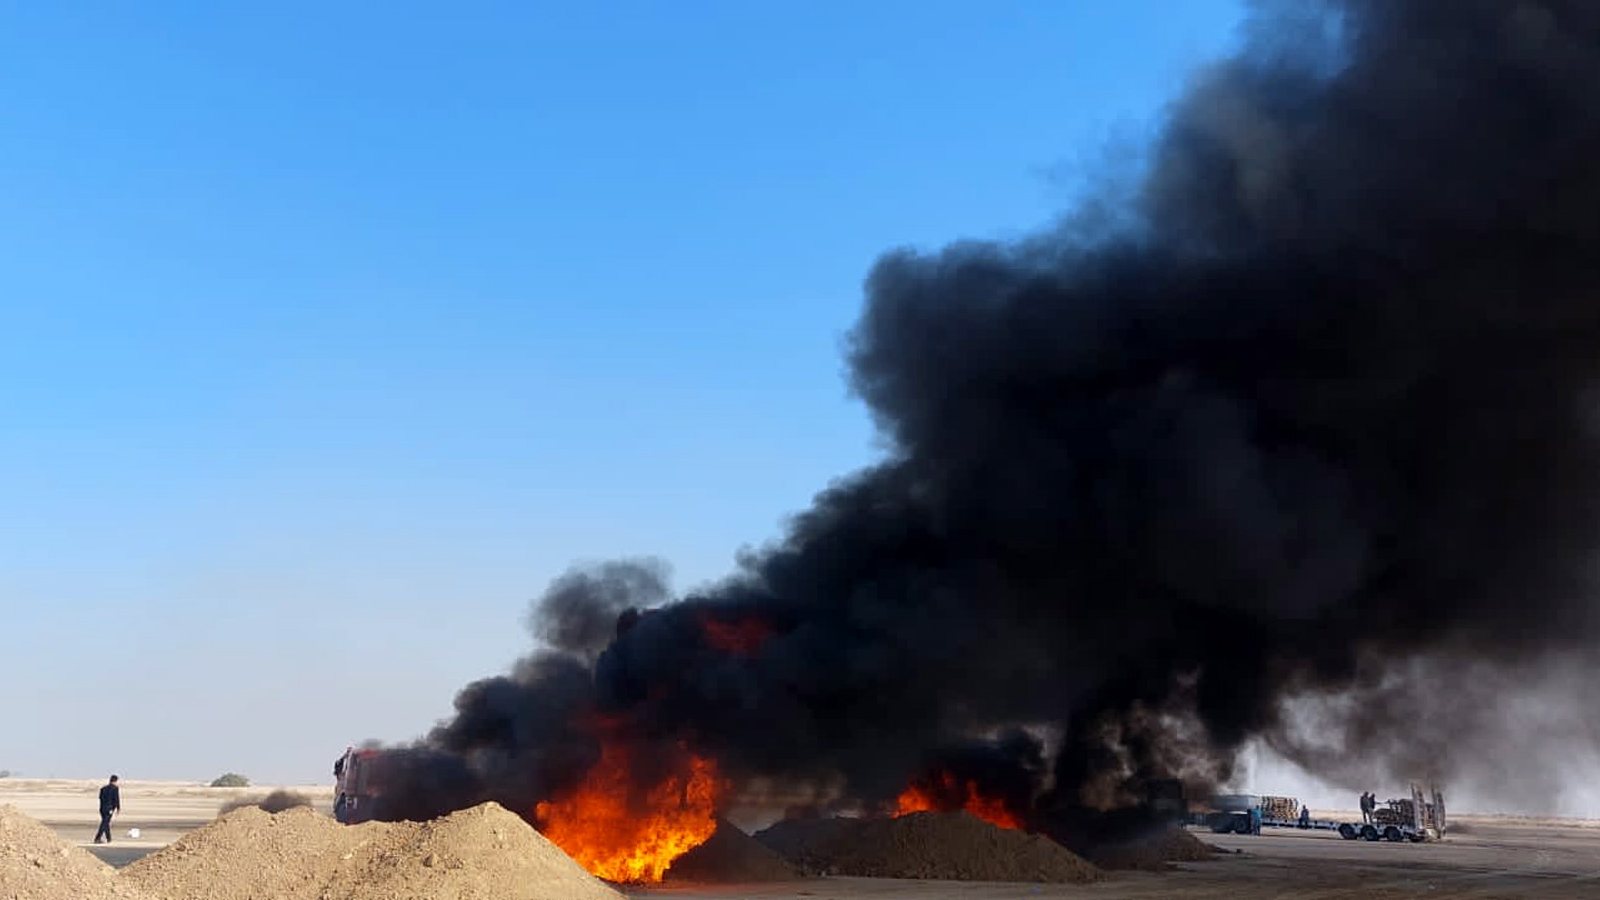 epa10372799 Fire and smoke rising from the place of destruction of confiscated drugs near Baghdad, Iraq, 18 December 2022. The Iraqi Minister of Health, Saleh Al-Hasnawi, announced the destruction of 509 tons of various drugs seized and stored in the forensic medicine department.  EPA/AHMED JALIL